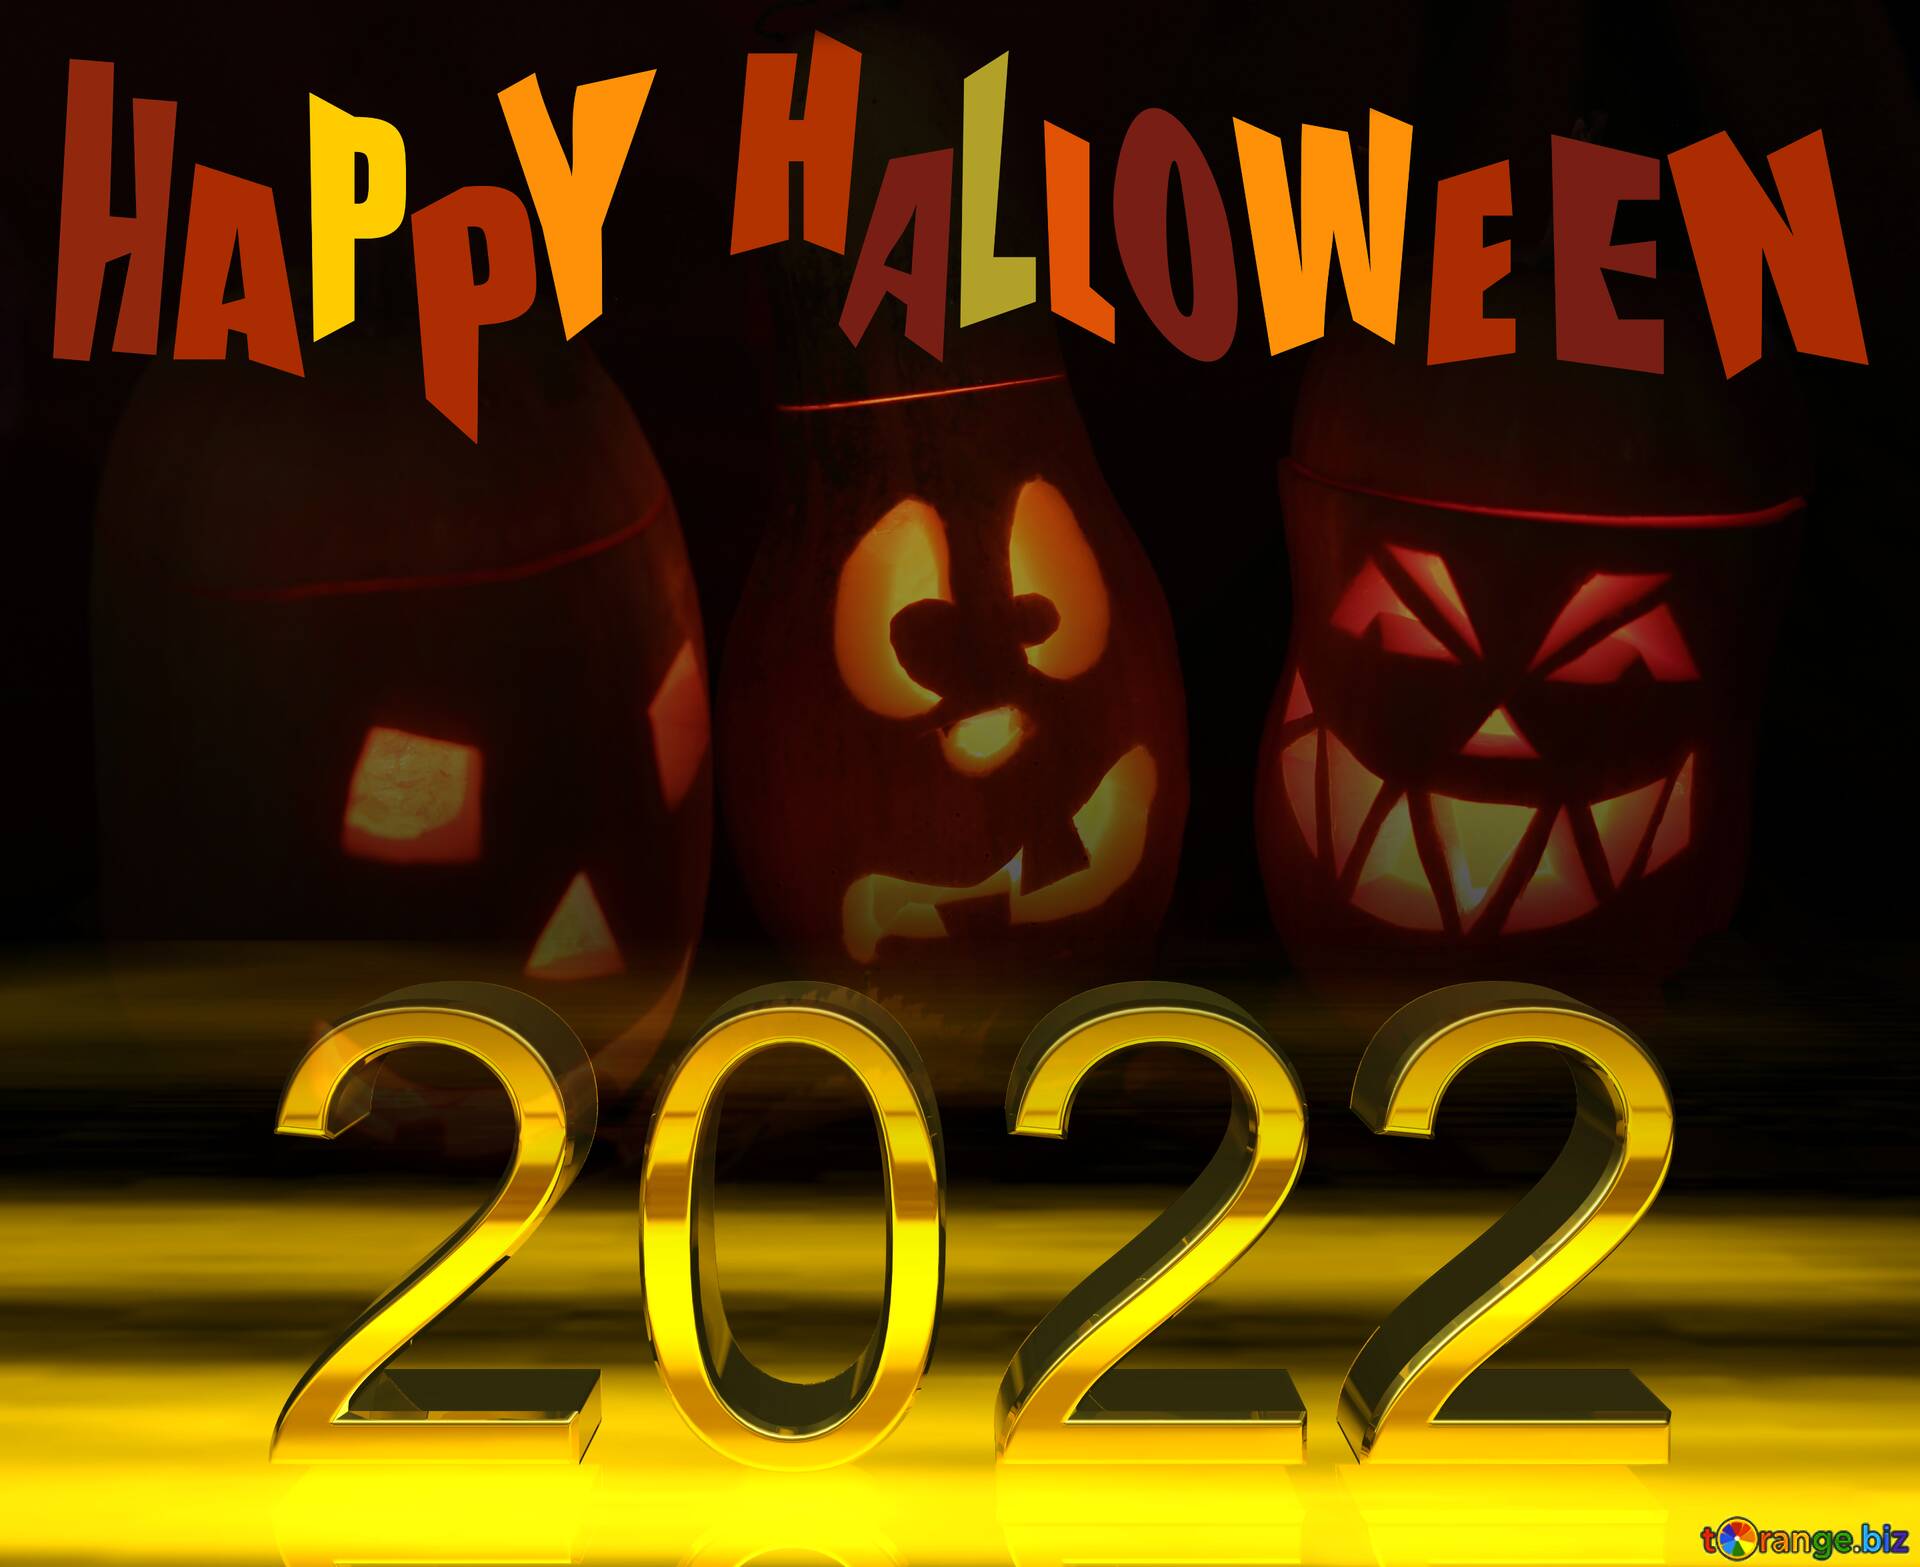 Download free picture Pumpkins 2022 happy Halloween 3d Digits on